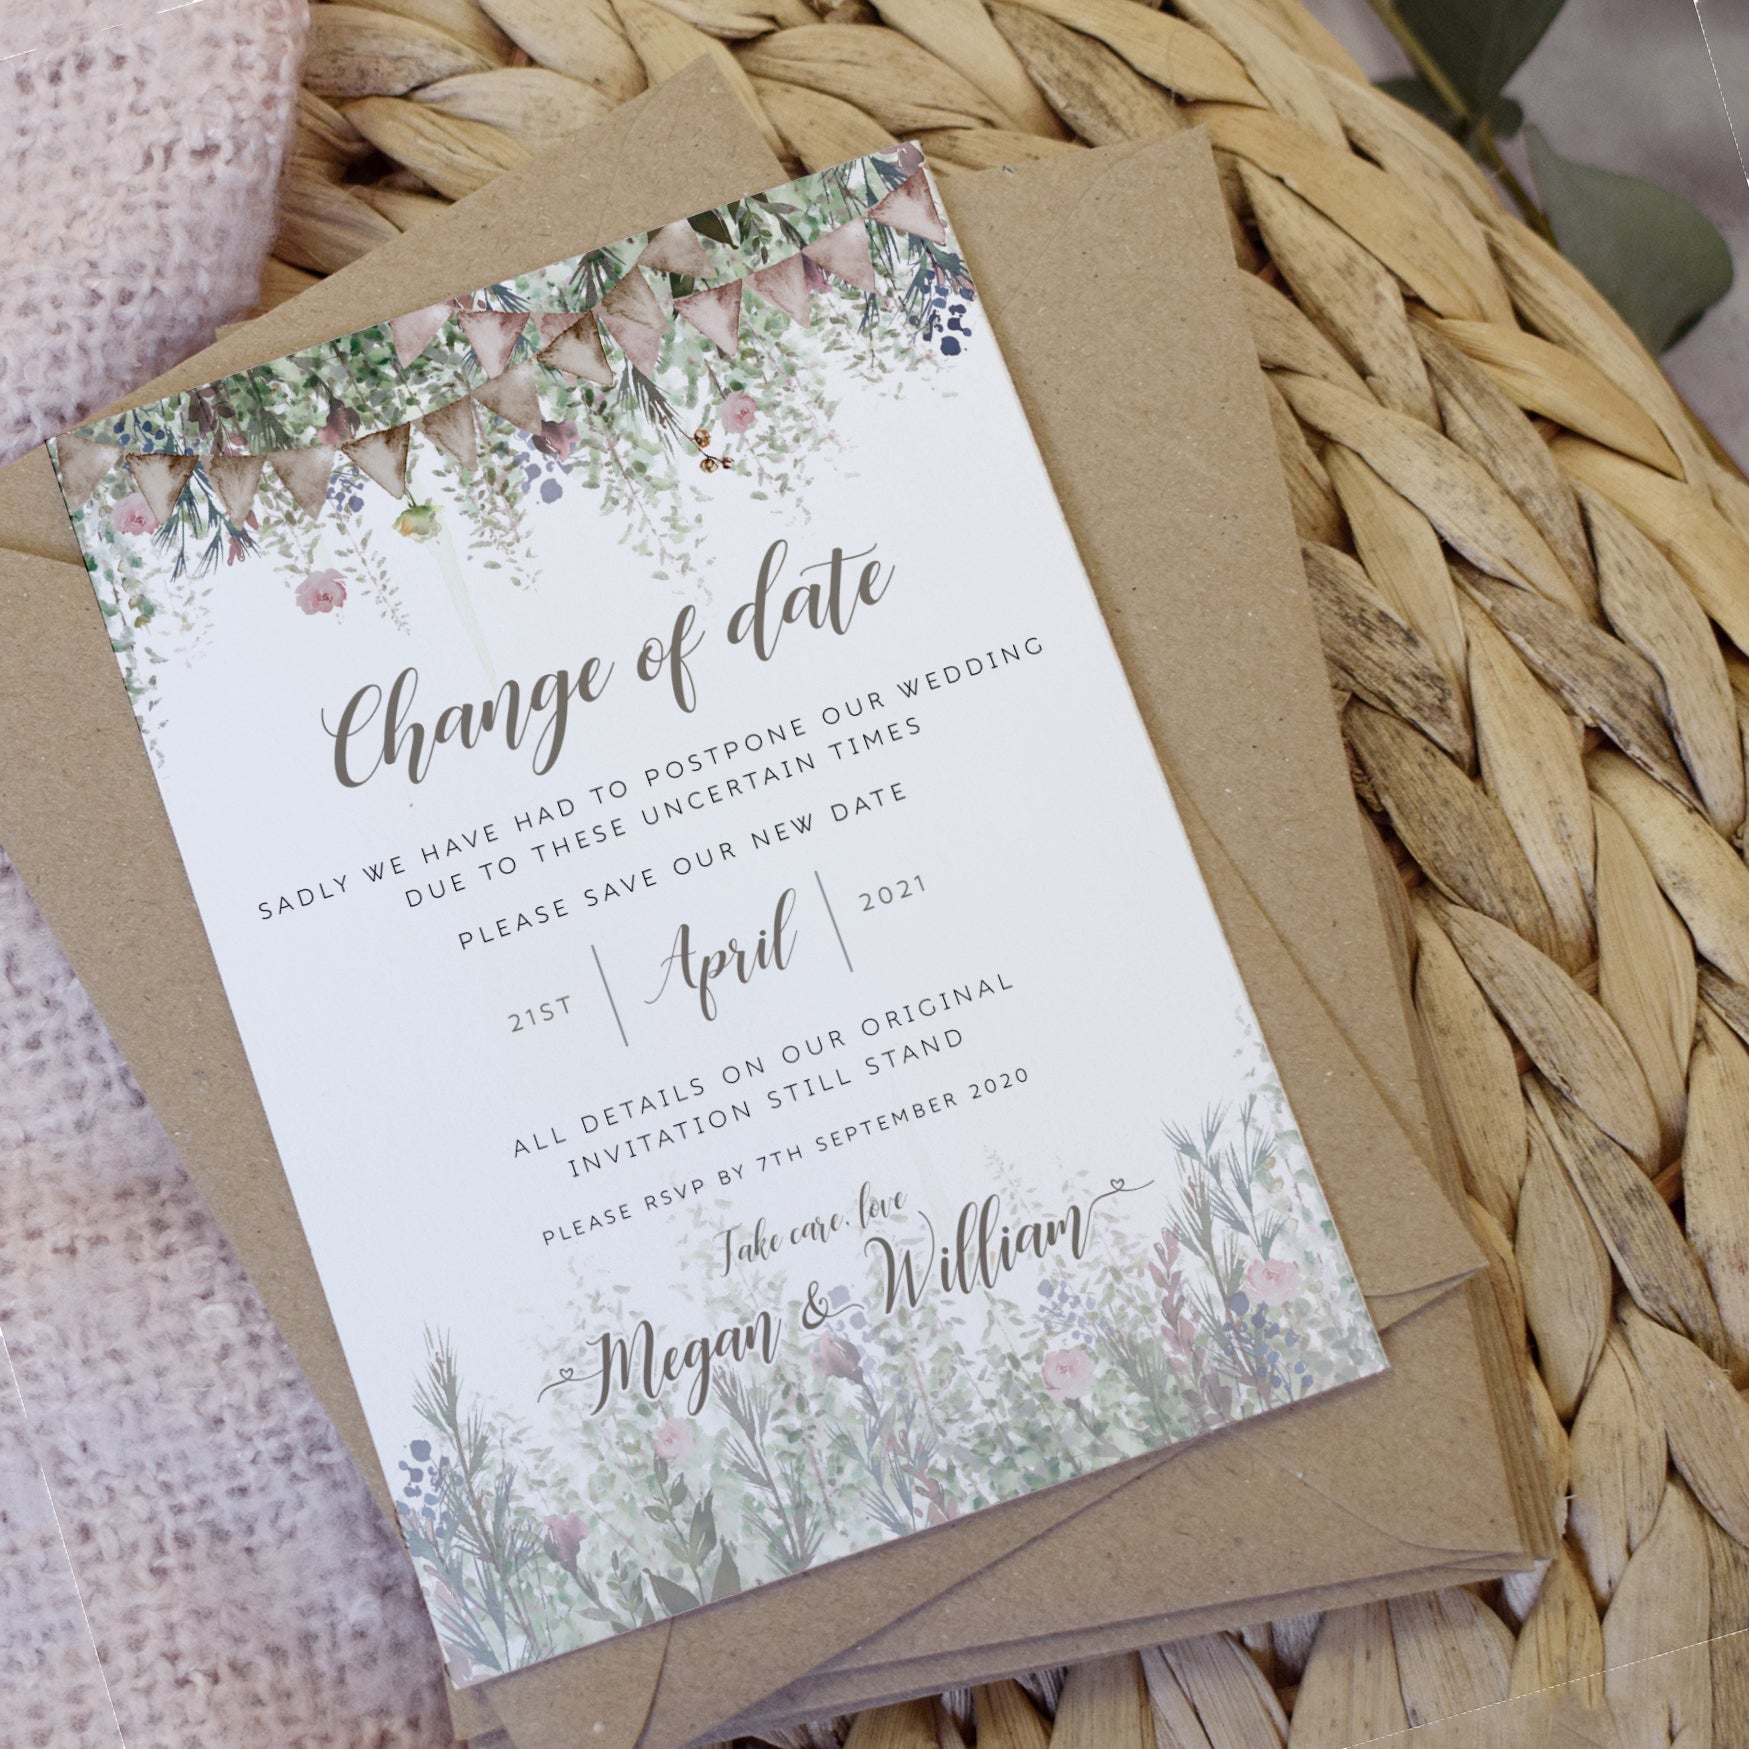 'Whimsical Barn' Wedding Change the date cards